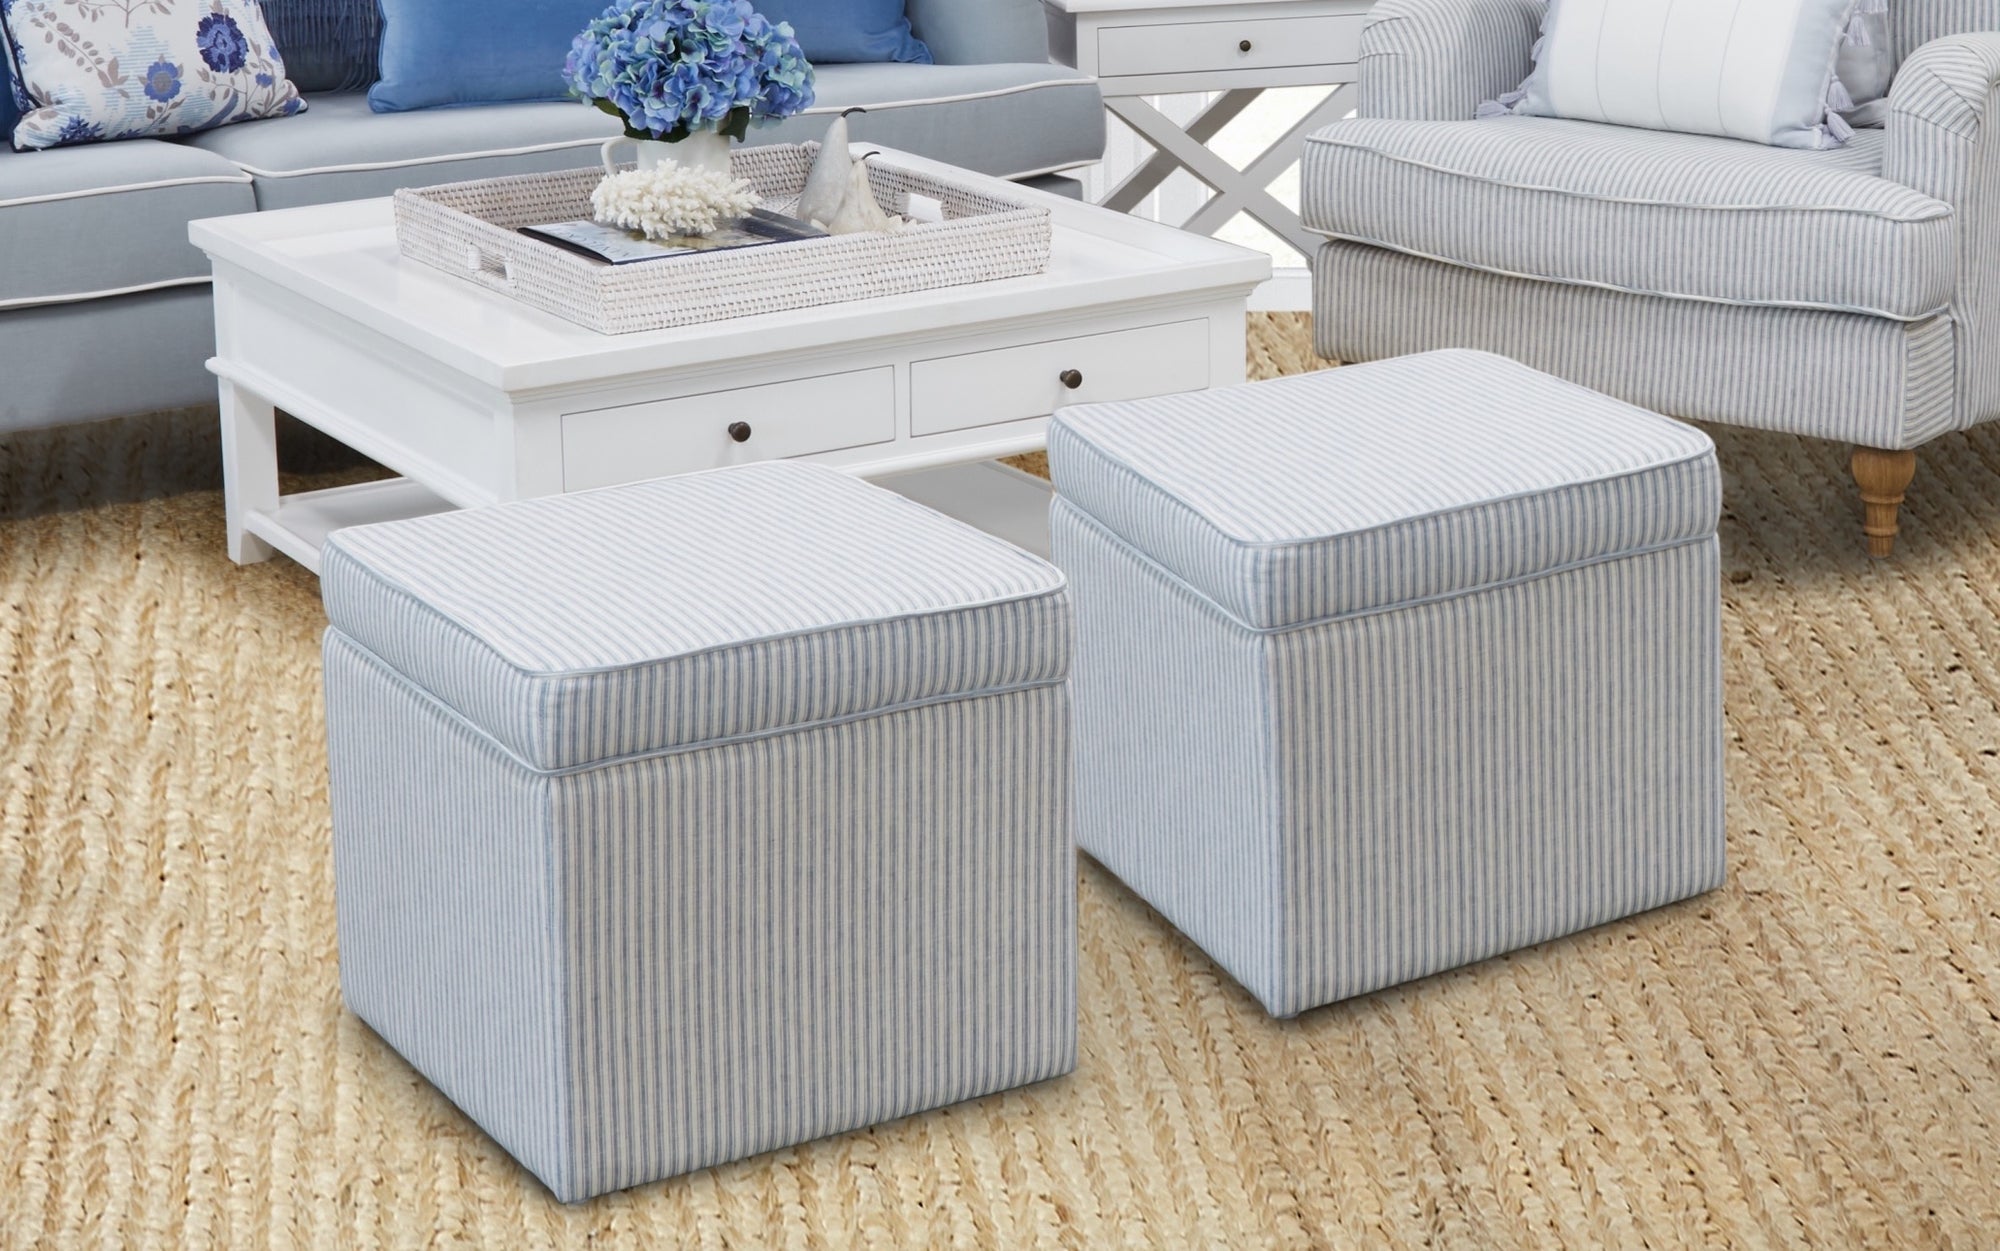 Using Storage Ottomans For Style and Function